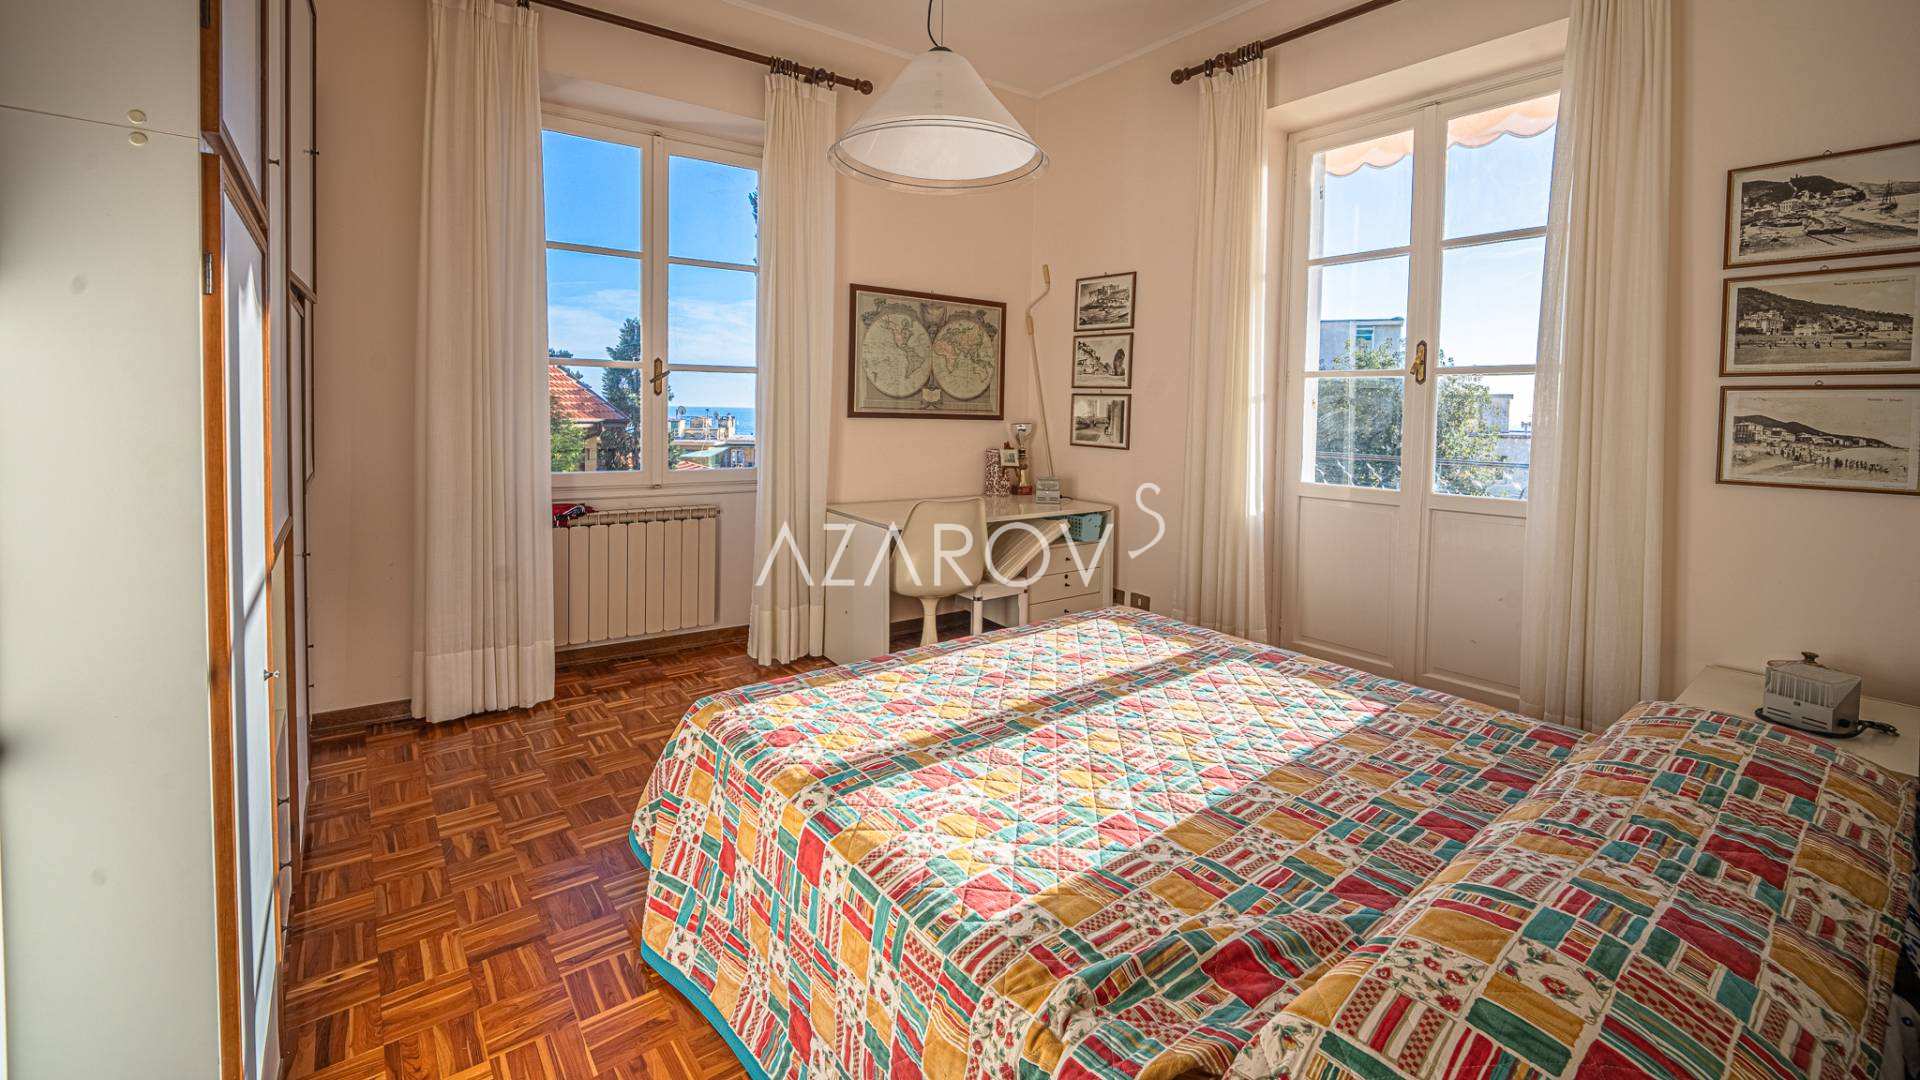 Apartment for sale in the center of Sanremo with sea views